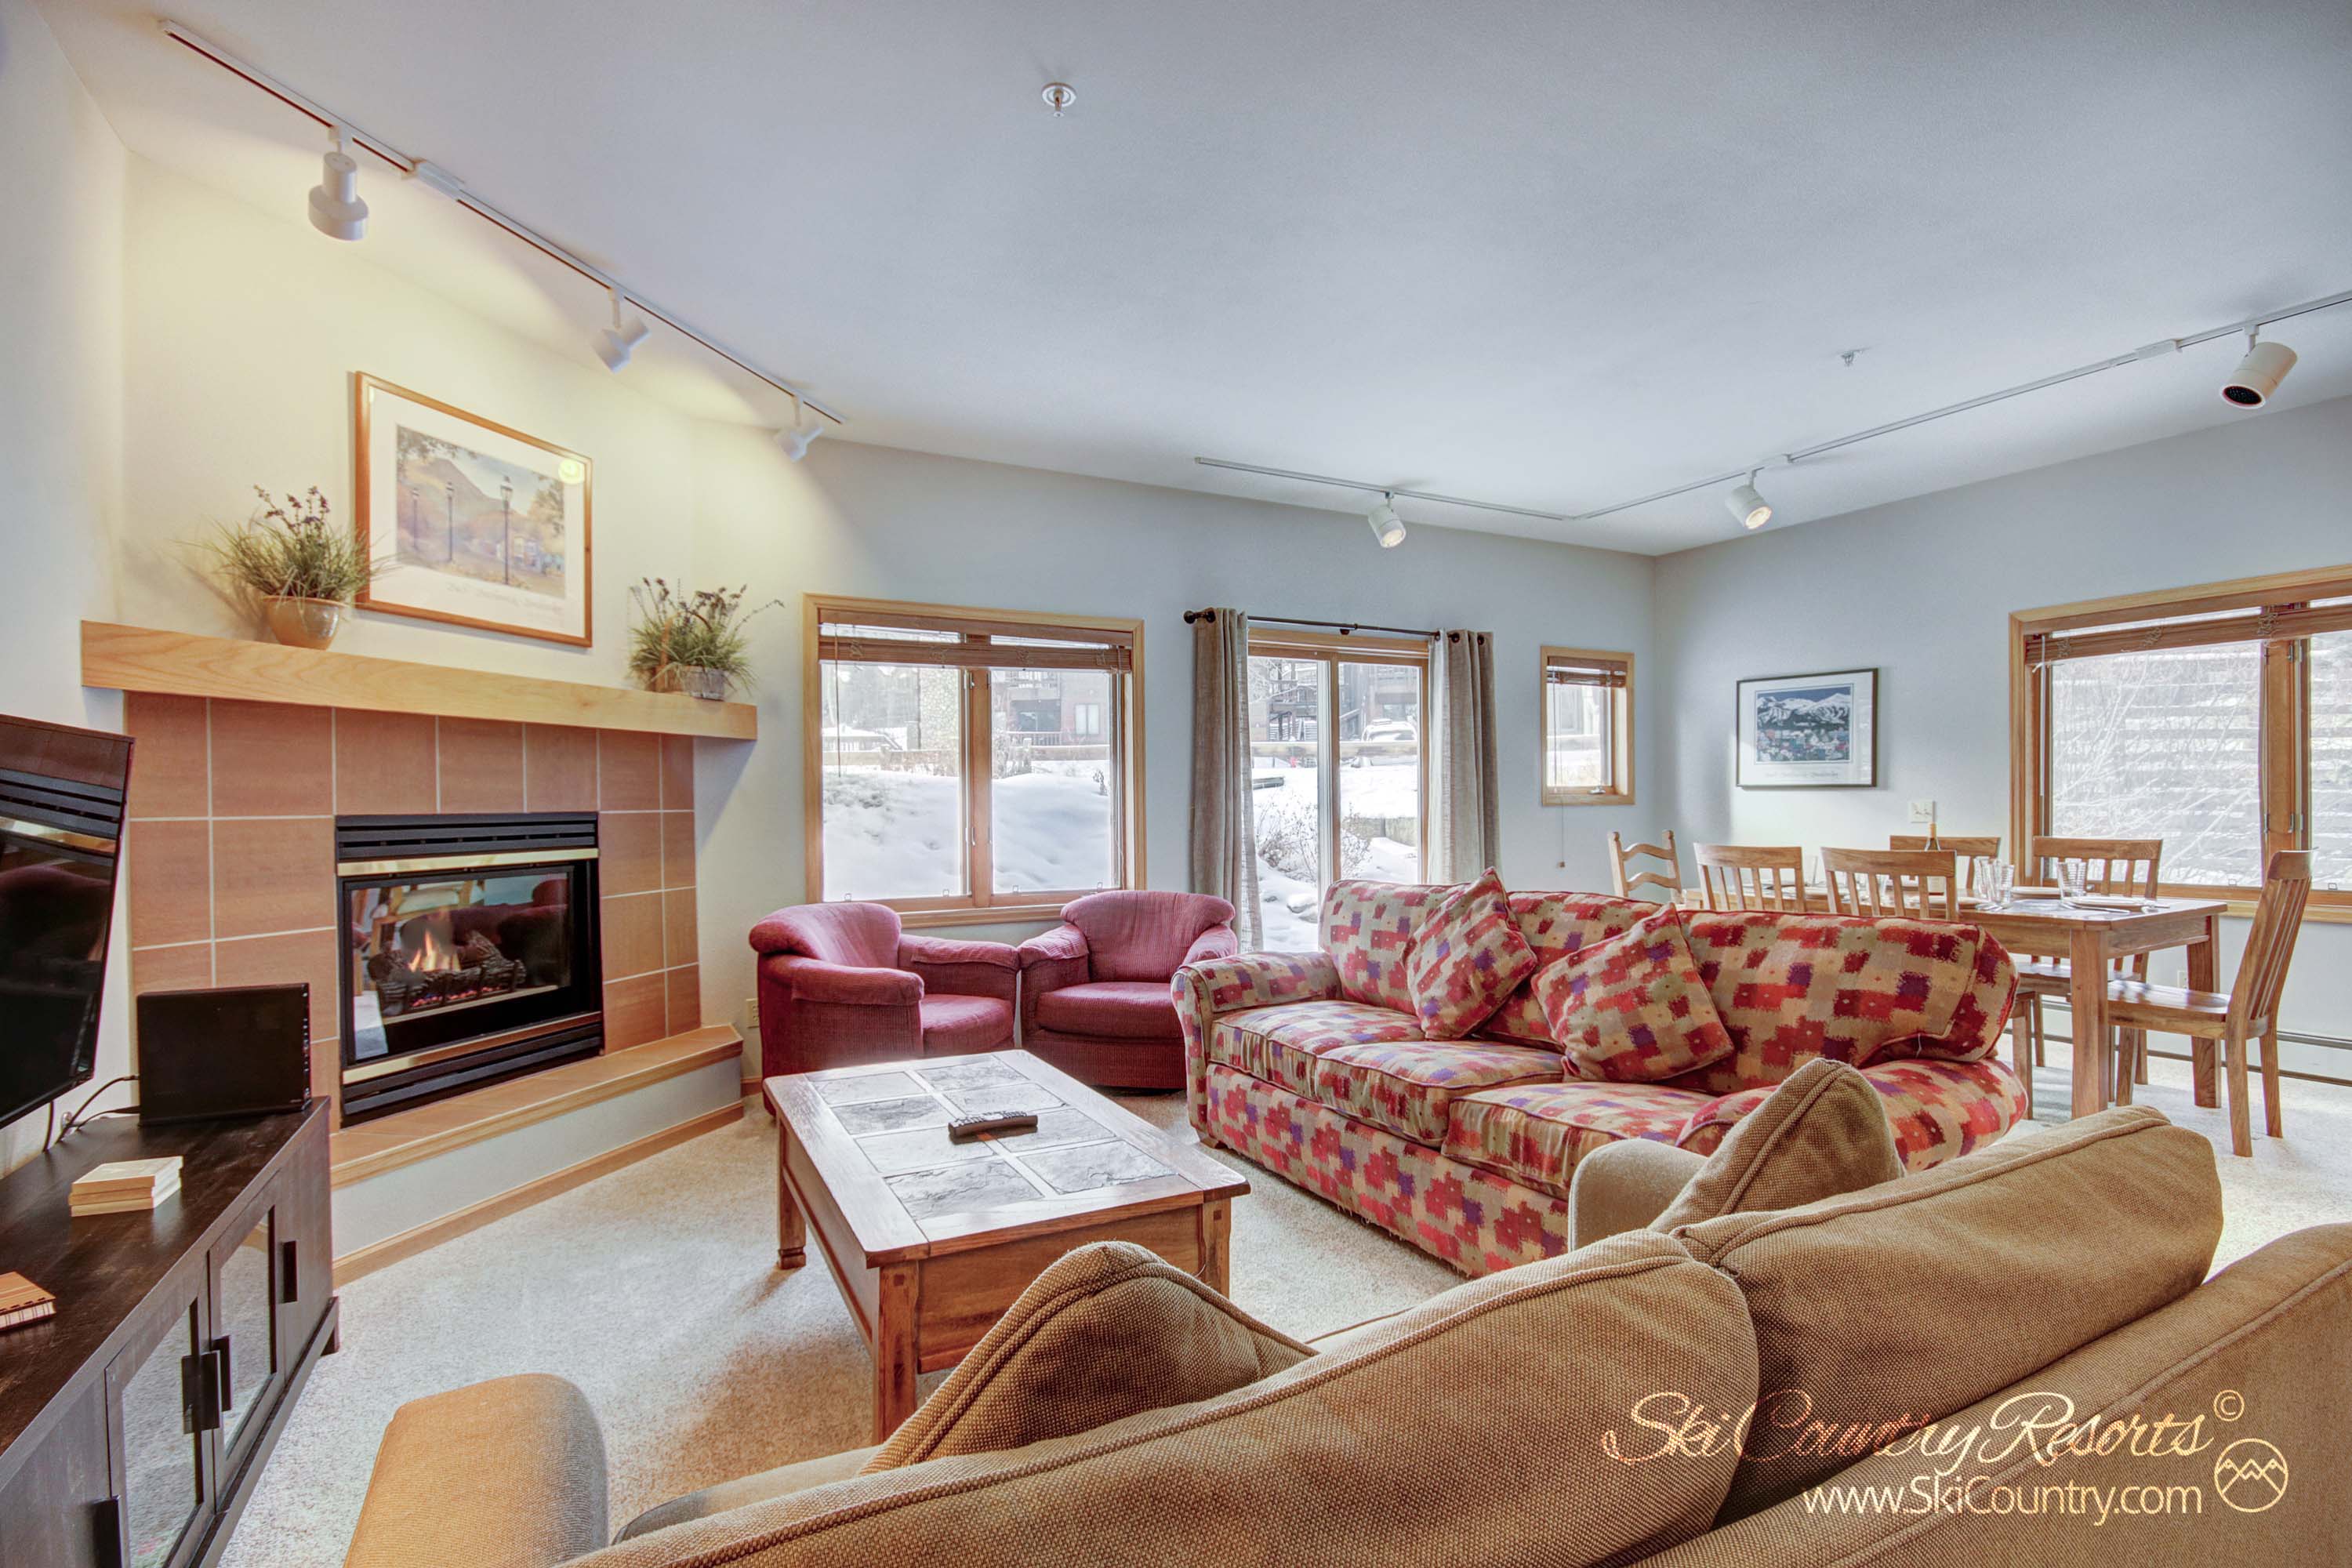 Get cozy on one of the two plush sofas & enjoy entertainment options on the the flatscreen TV. Or warm up by the inviting fireplace, nestled in one of the two neighboring side chairs while losing yourself in a captivating read or the outside views.